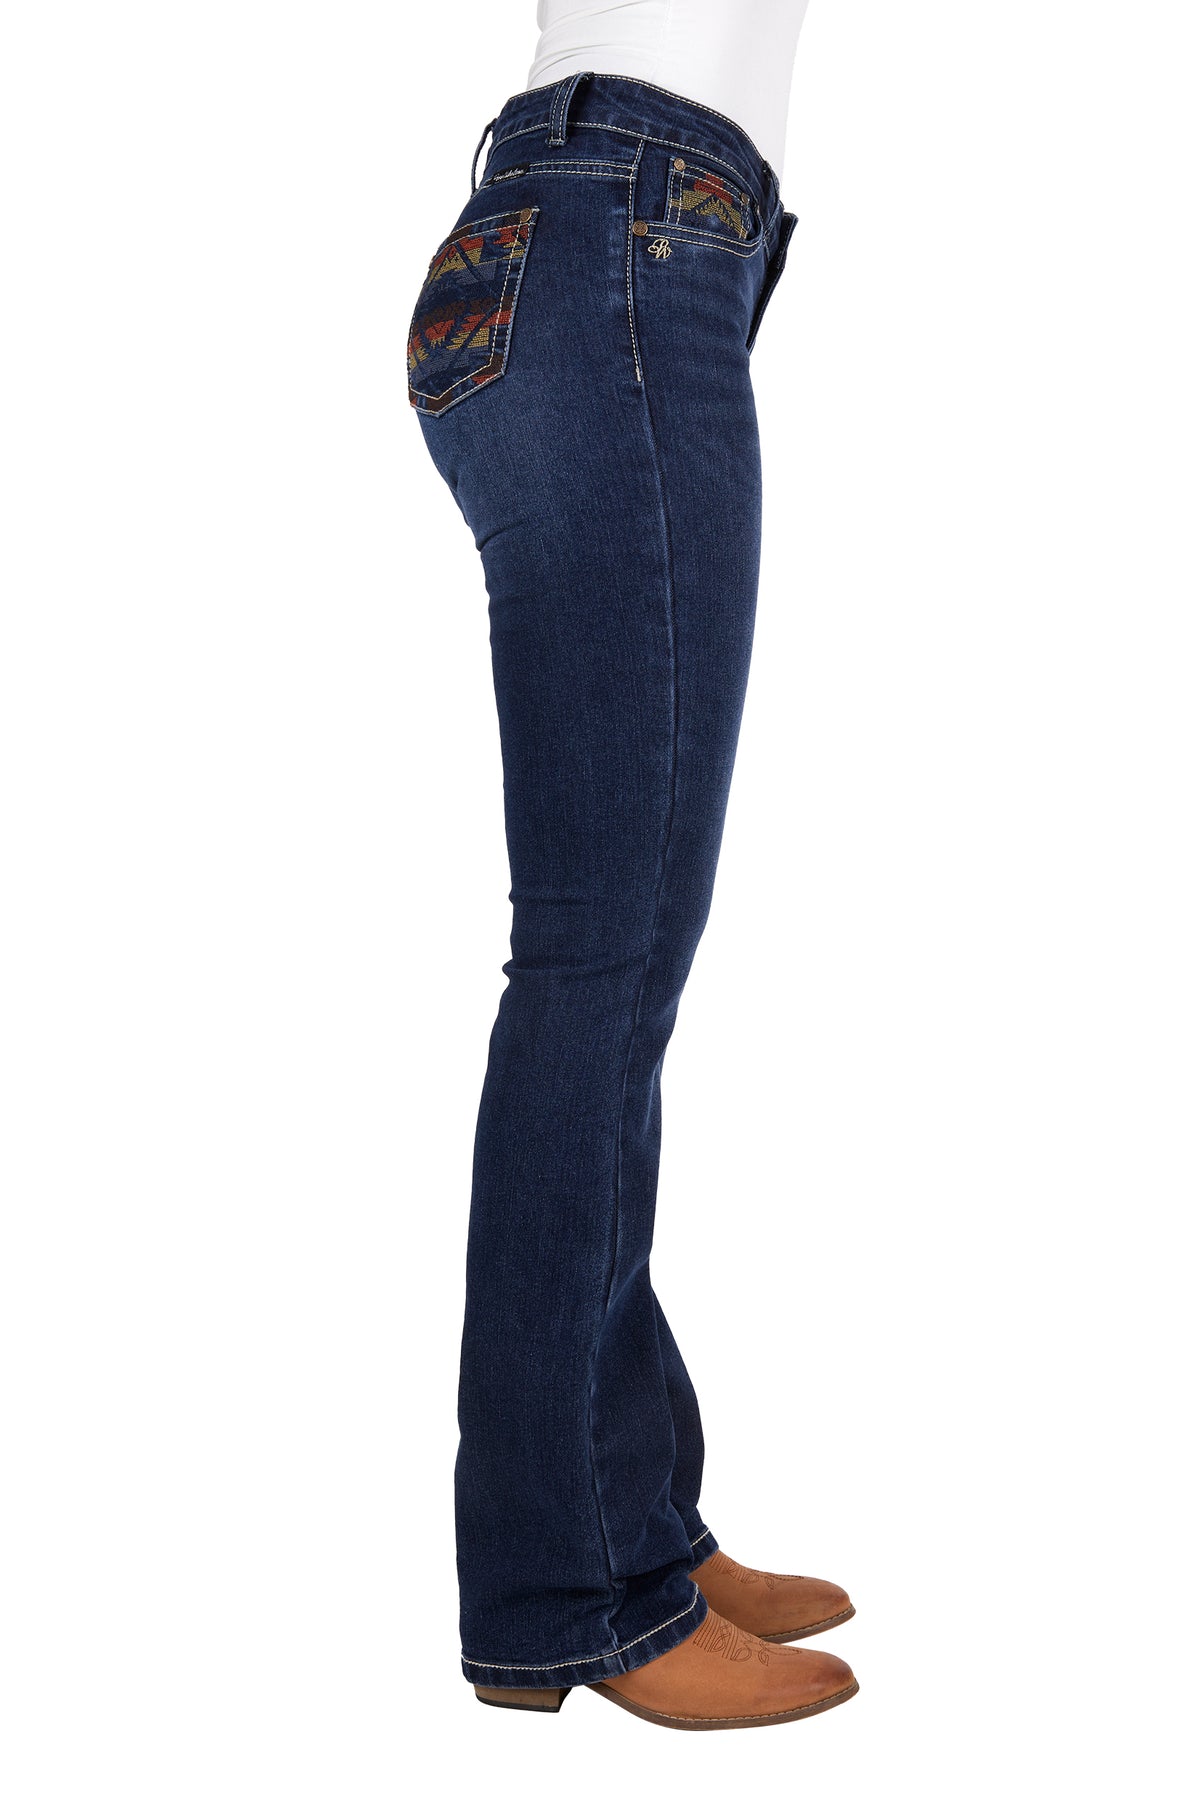 Pure Western Womens Ola Relaxed Rider Jean - Evening Sky